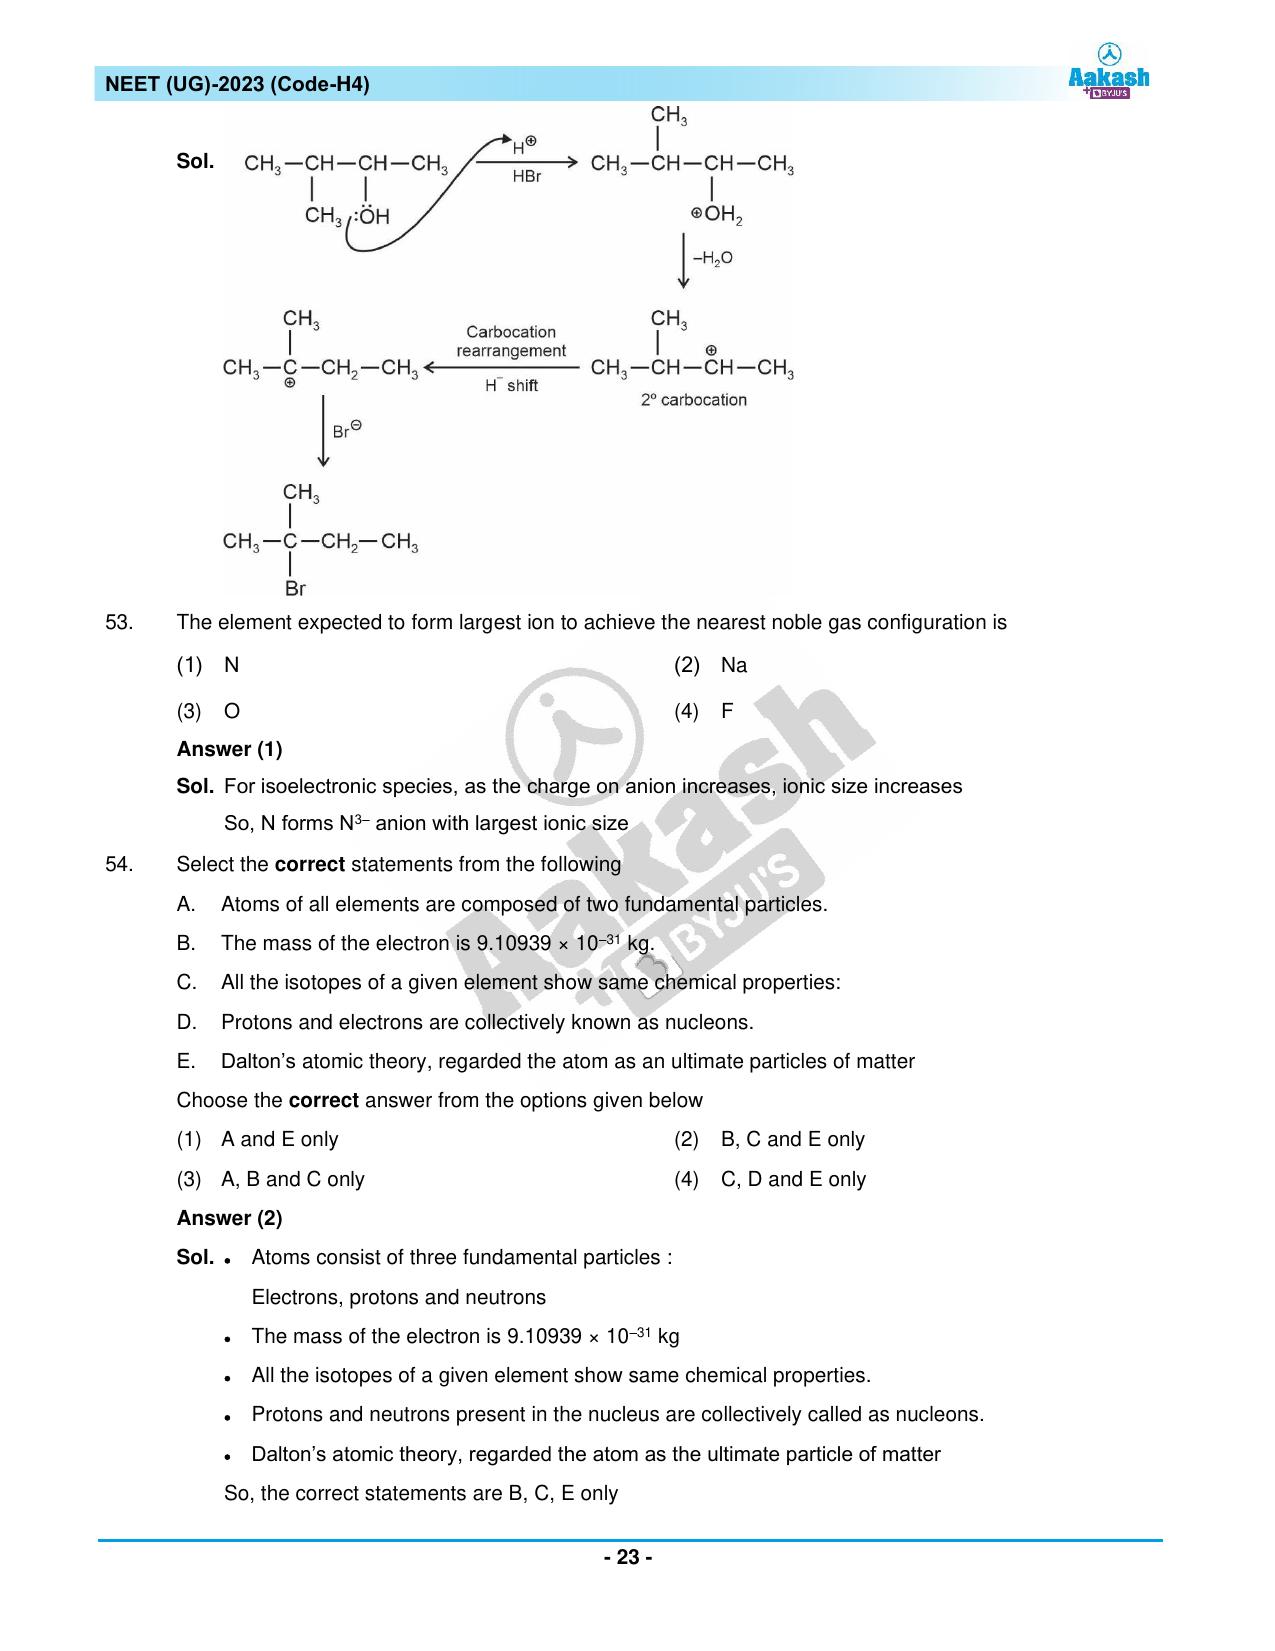 NEET 2023 Question Paper H4 - Page 23